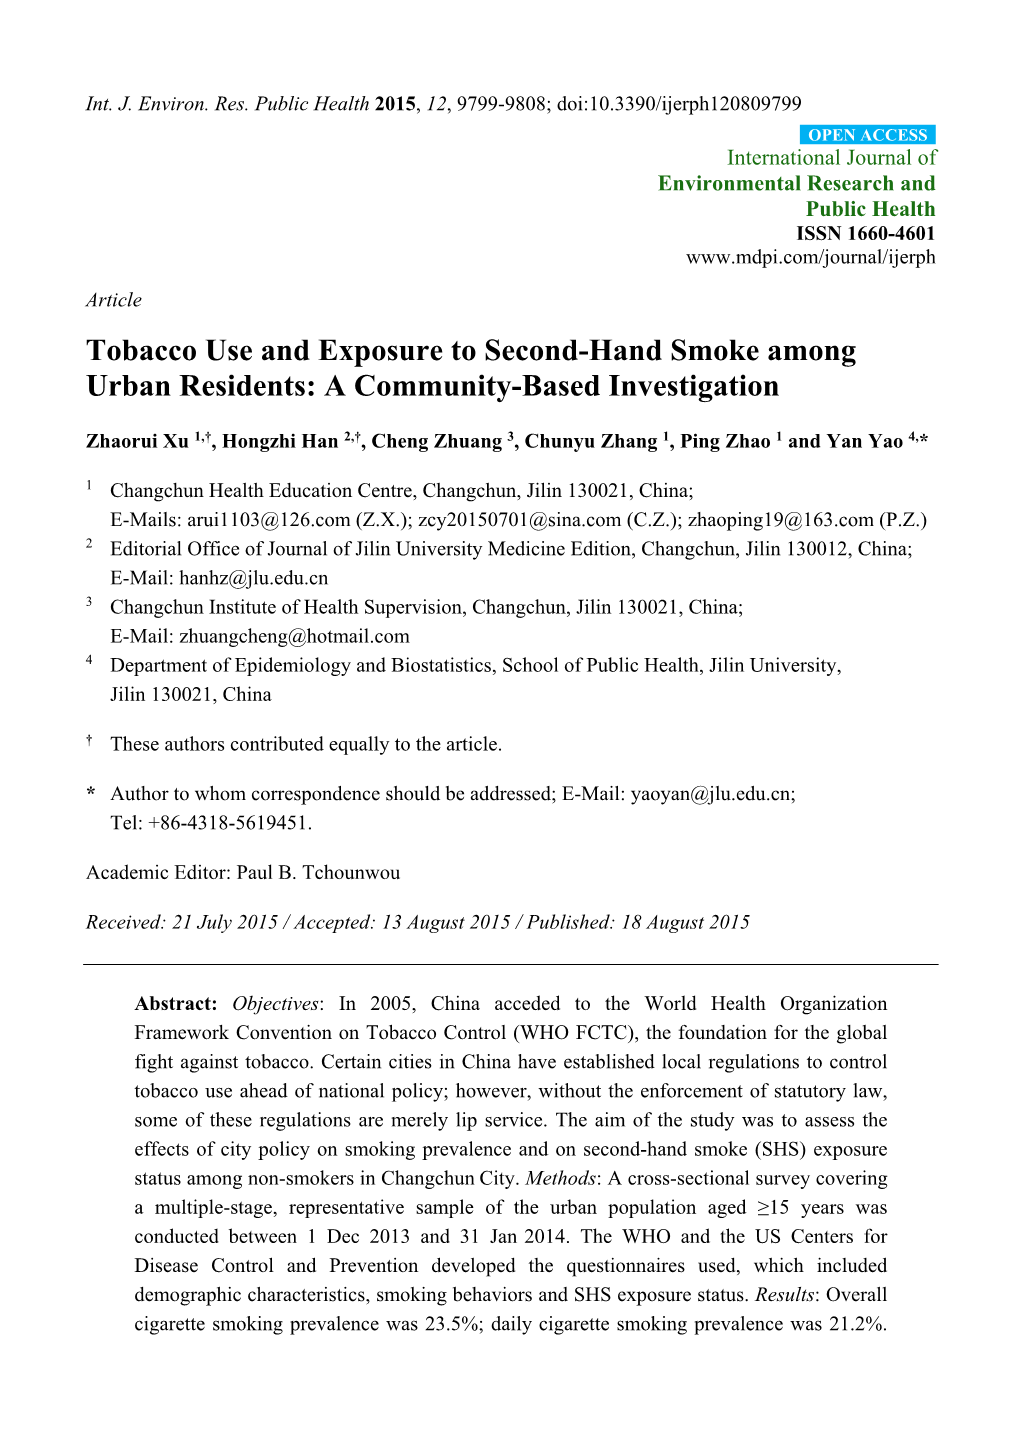 Tobacco Use and Exposure to Second-Hand Smoke Among Urban Residents: a Community-Based Investigation